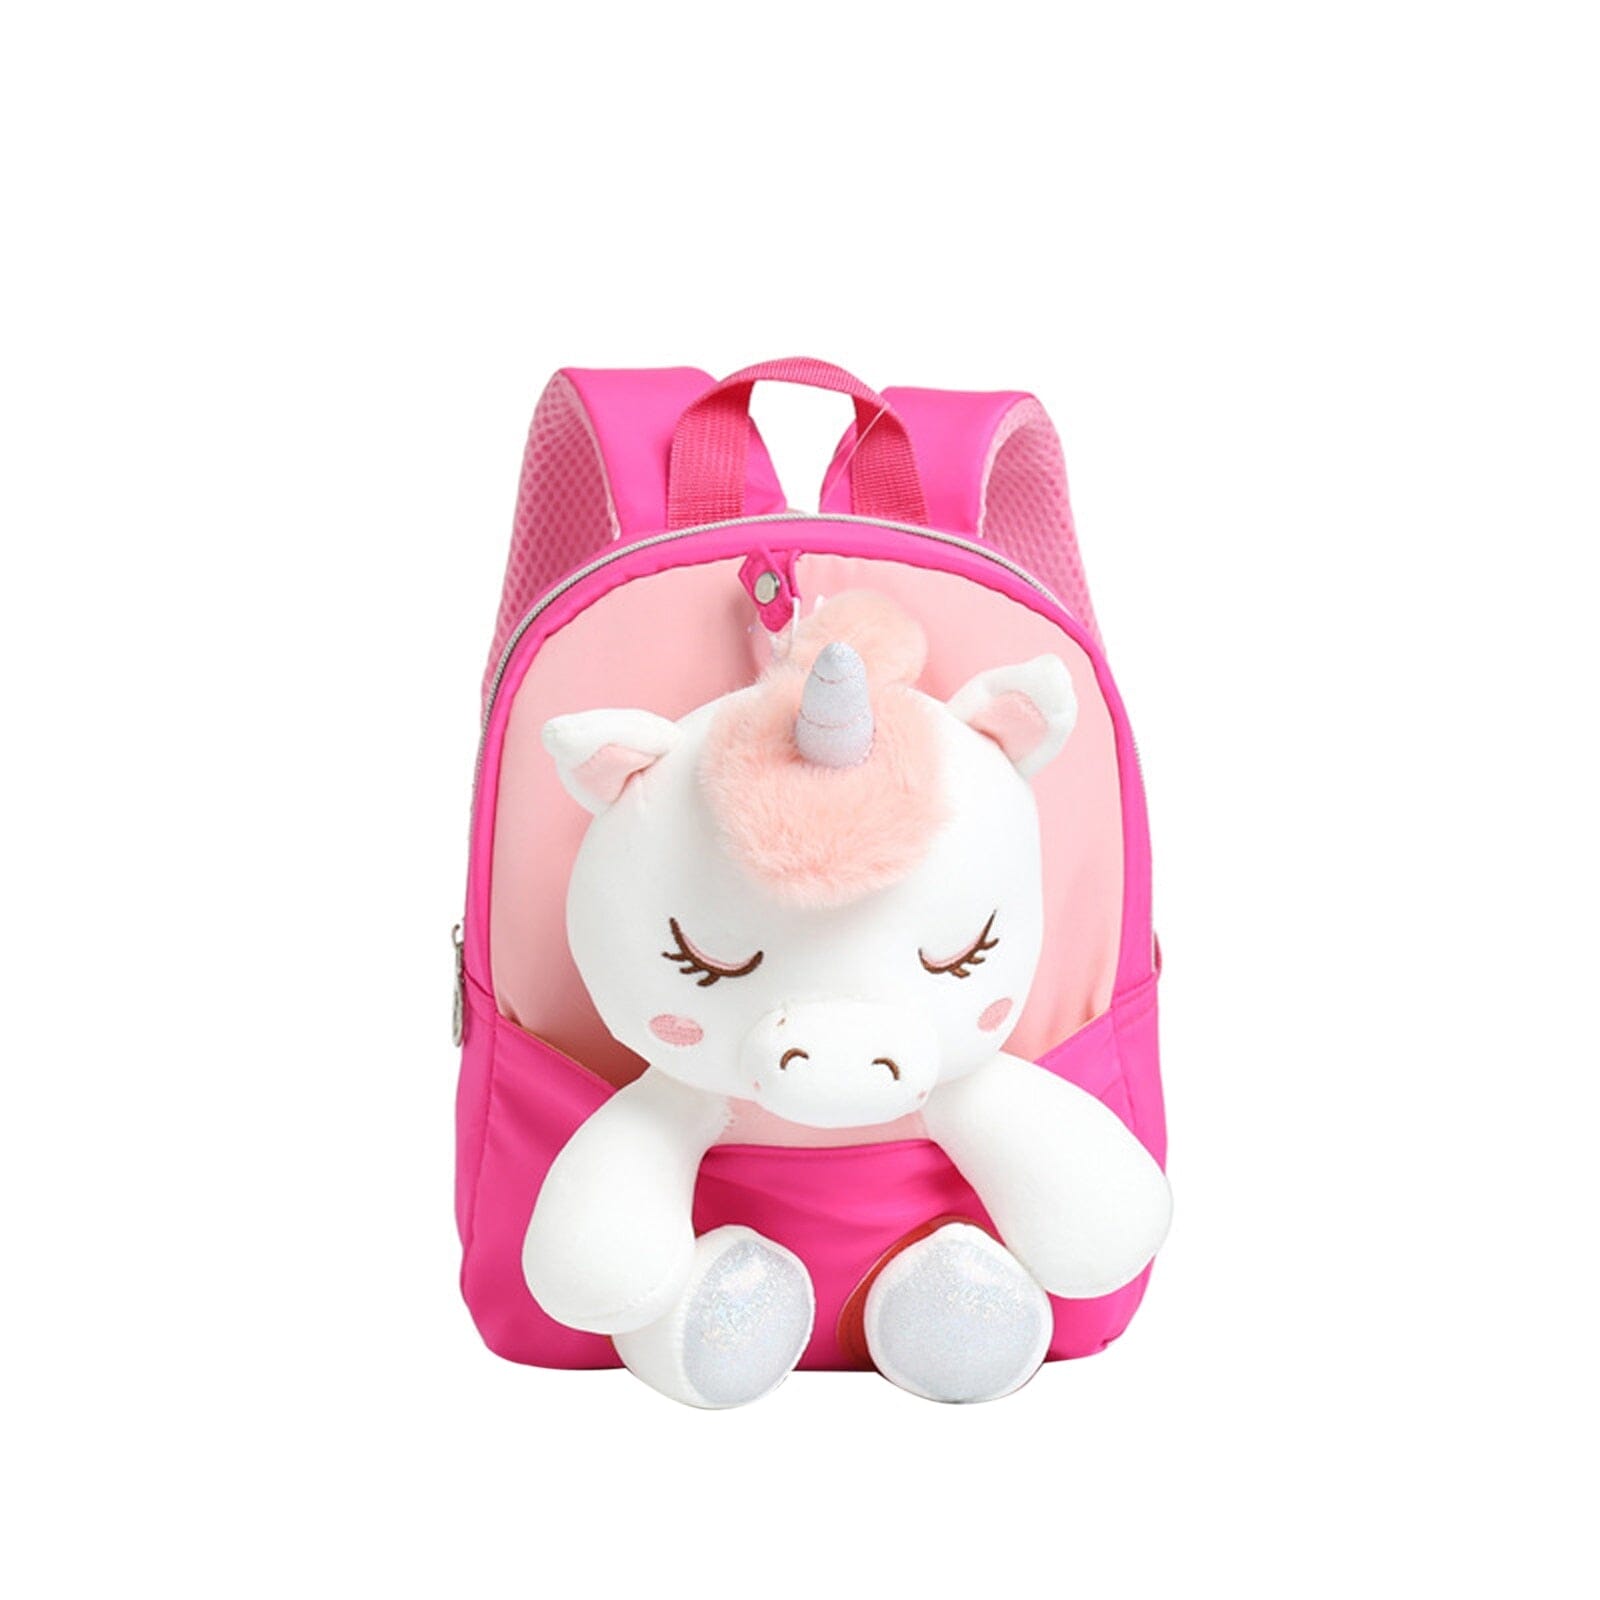 Unicorn Plush Backpack The Store Bags Rose Red 